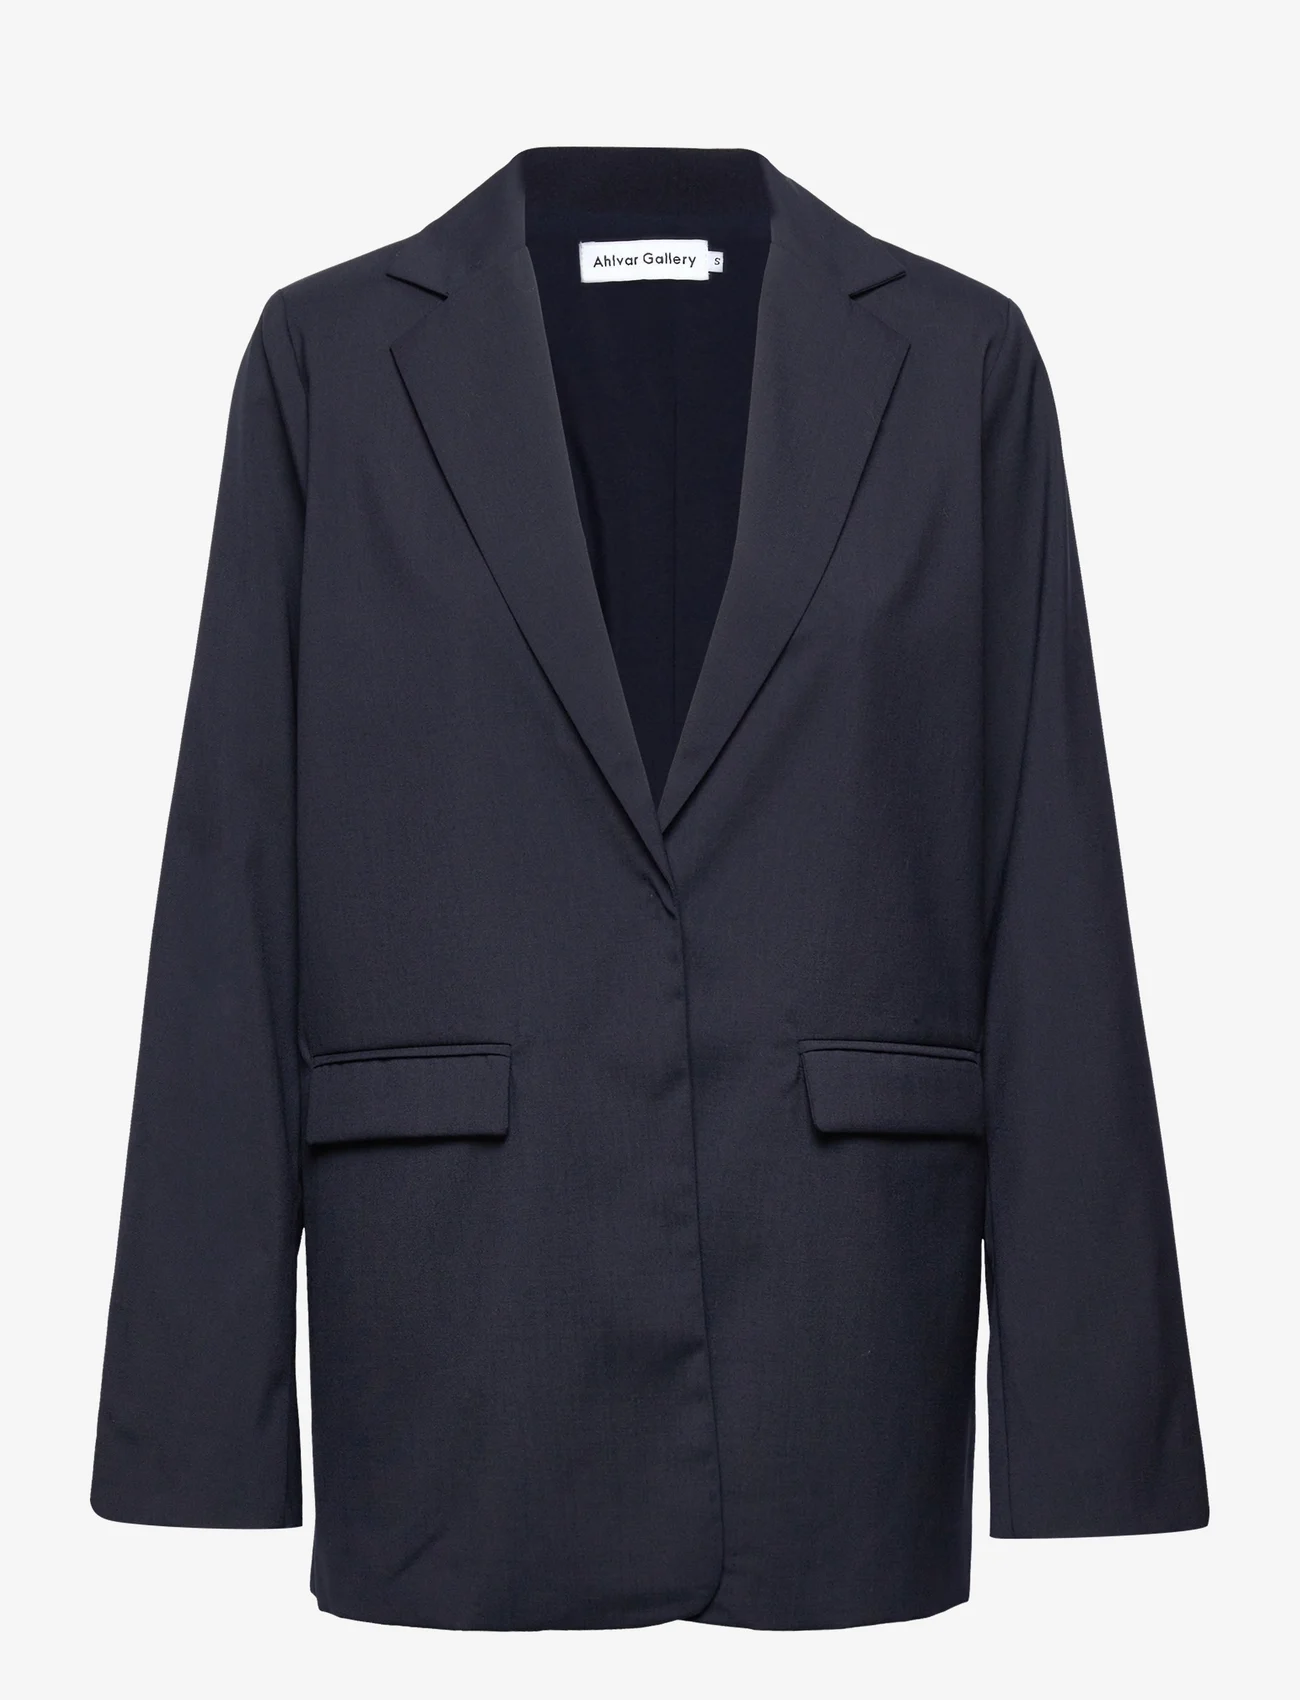 Ahlvar Gallery - Liv wool blazer - party wear at outlet prices - navy - 0